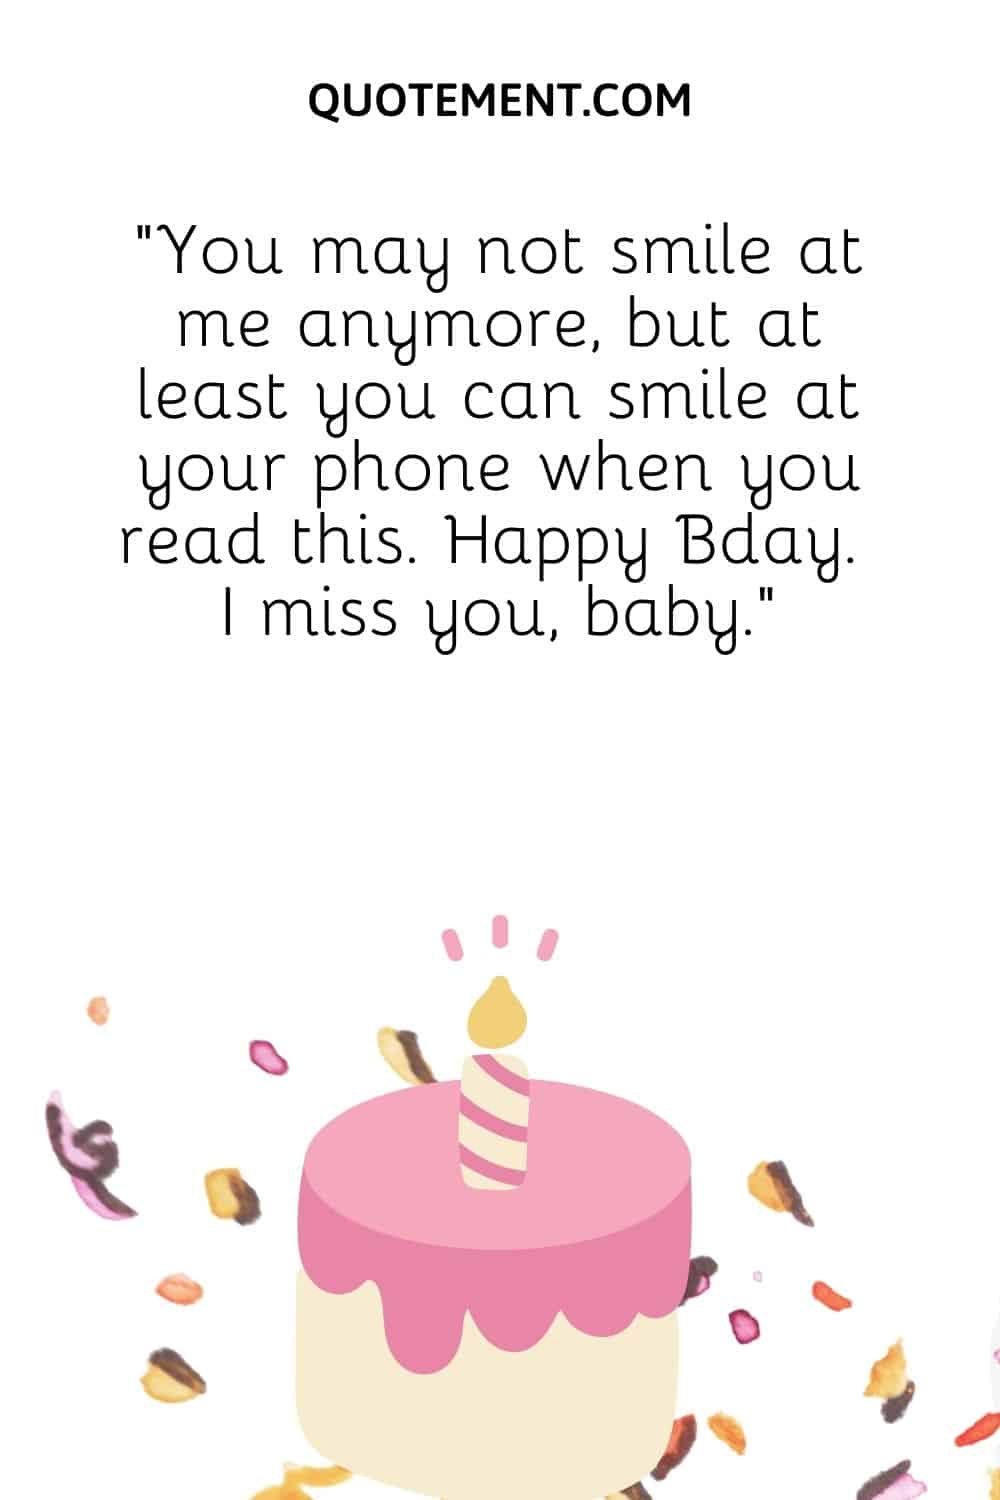 “You may not smile at me anymore, but at least you can smile at your phone when you read this. Happy Bday. I miss you, baby.”